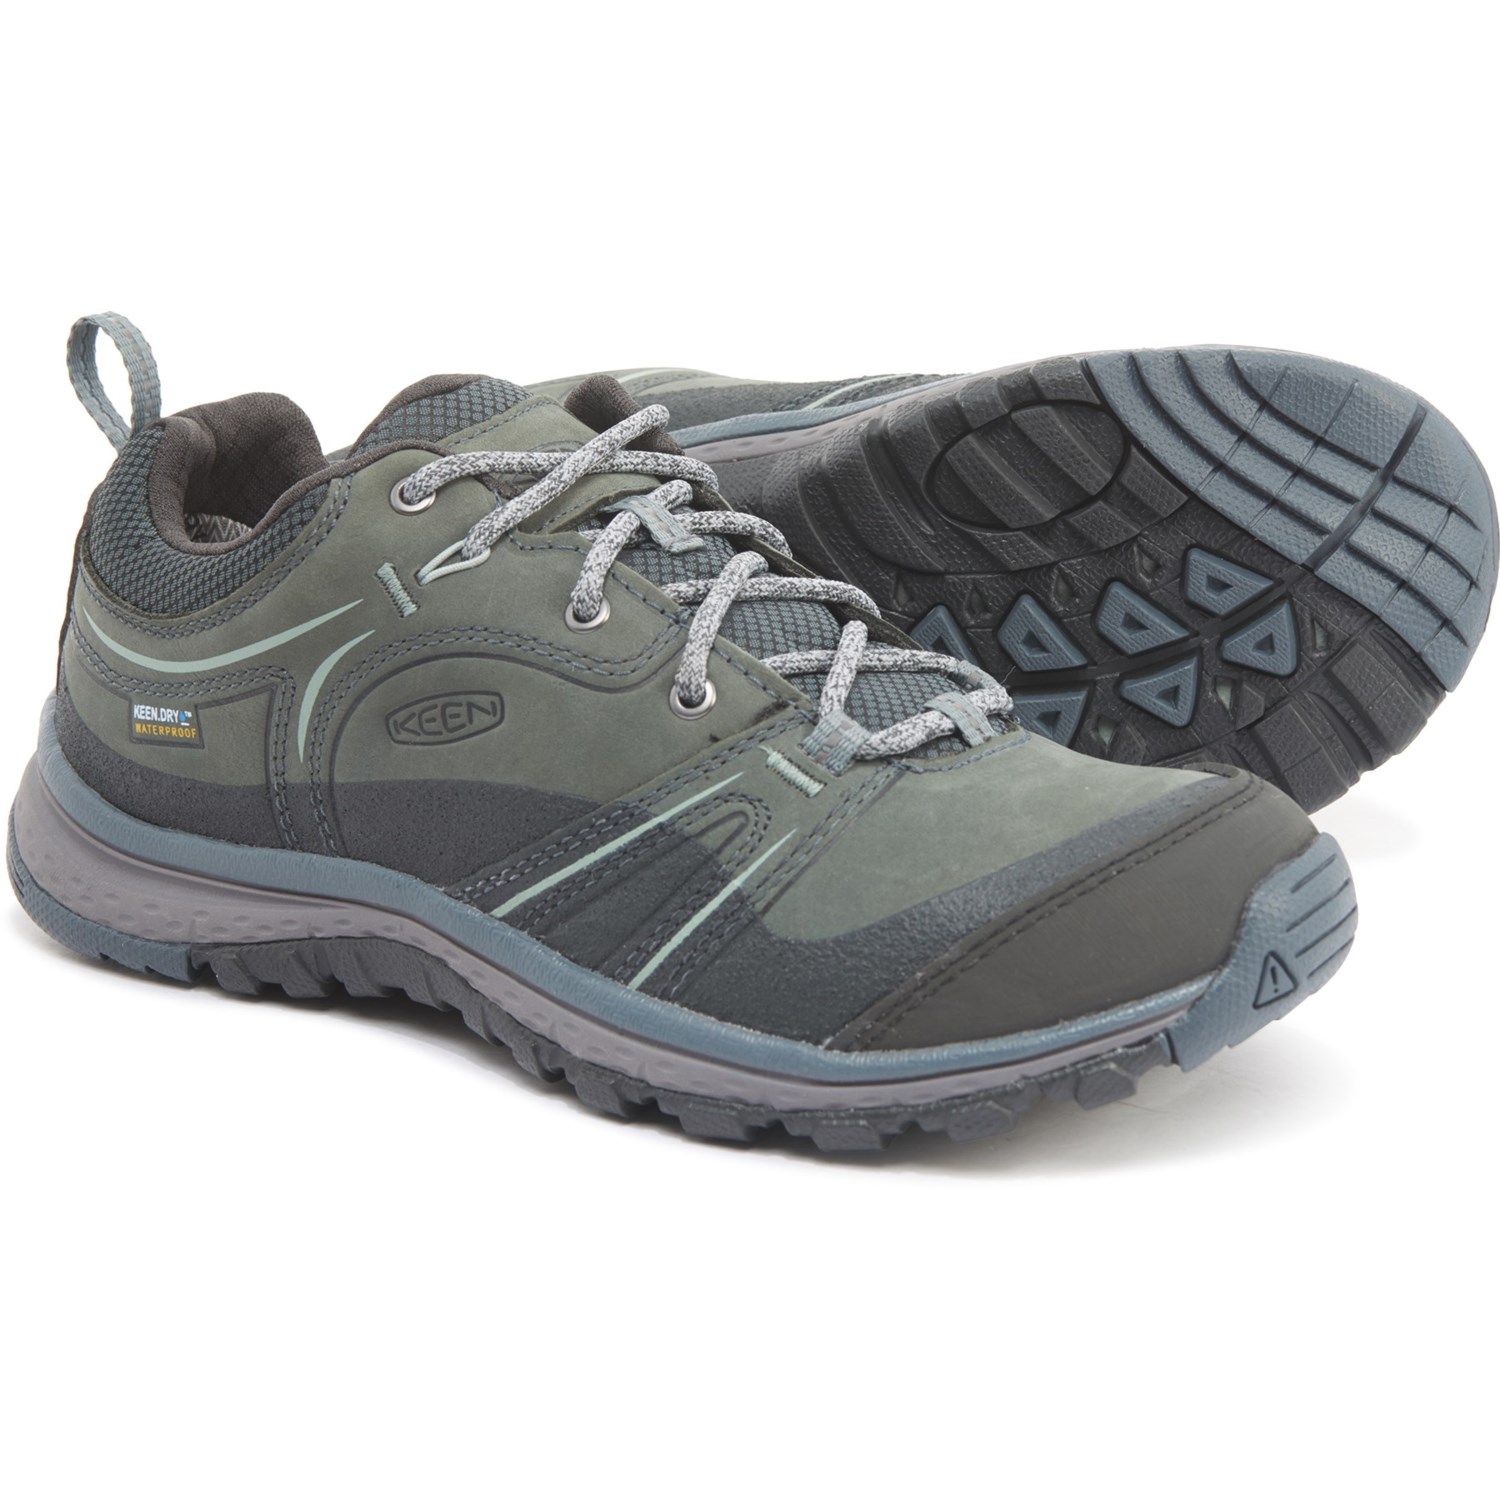 Keen Terradora Leather Hiking Shoes (For Women) - Save 44%